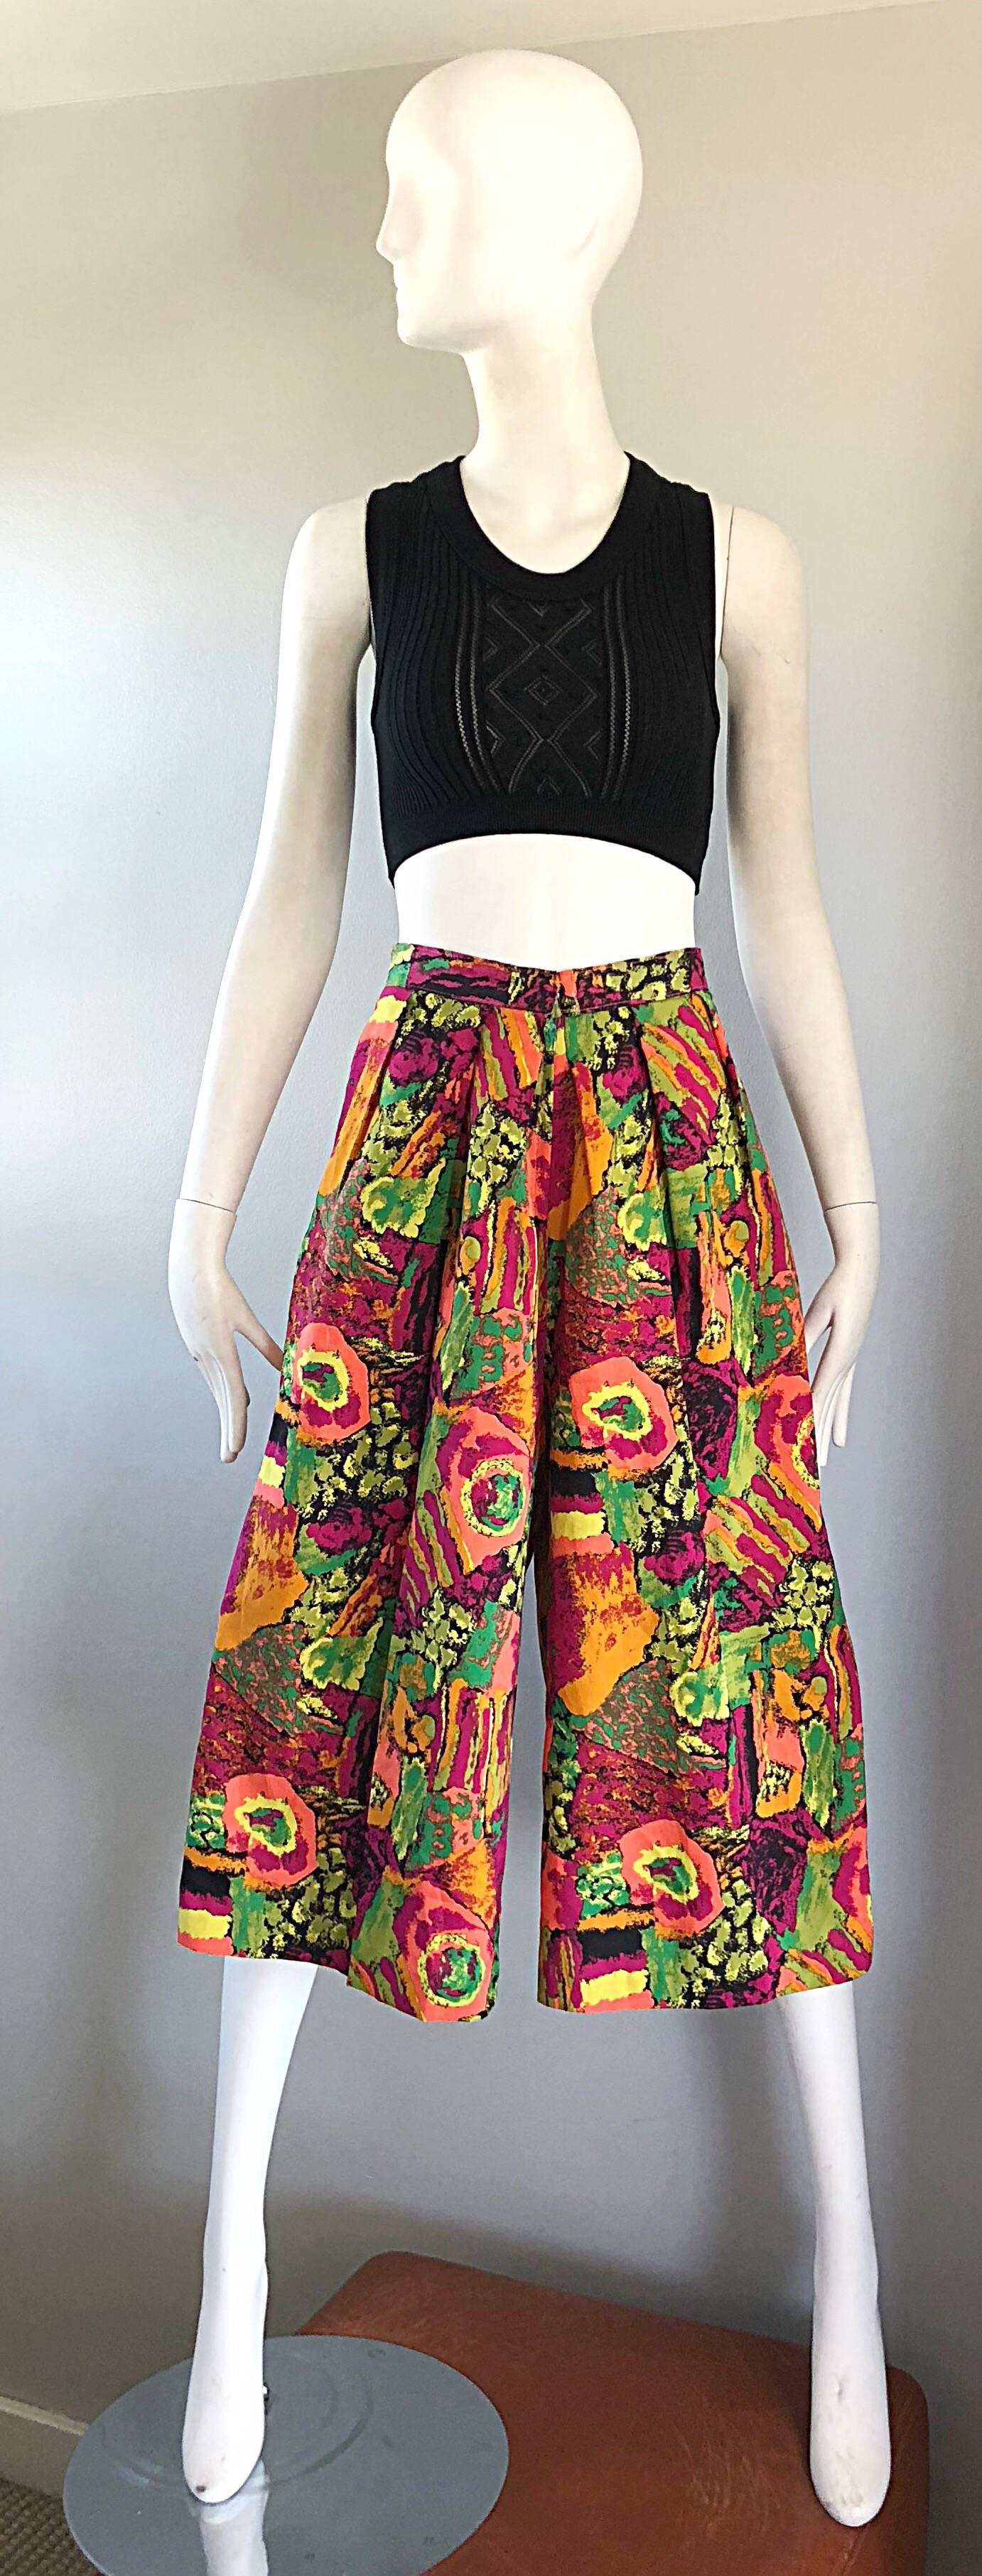 Fantastic 1980s colorful high waisted wide leg culottes shorts! Features abstract prints in fuchsia, pink, green, orange and yellow throughout. Button closure at fron center waist with a zipper fly. POCKETS at each side of the hip. The pictured 90s